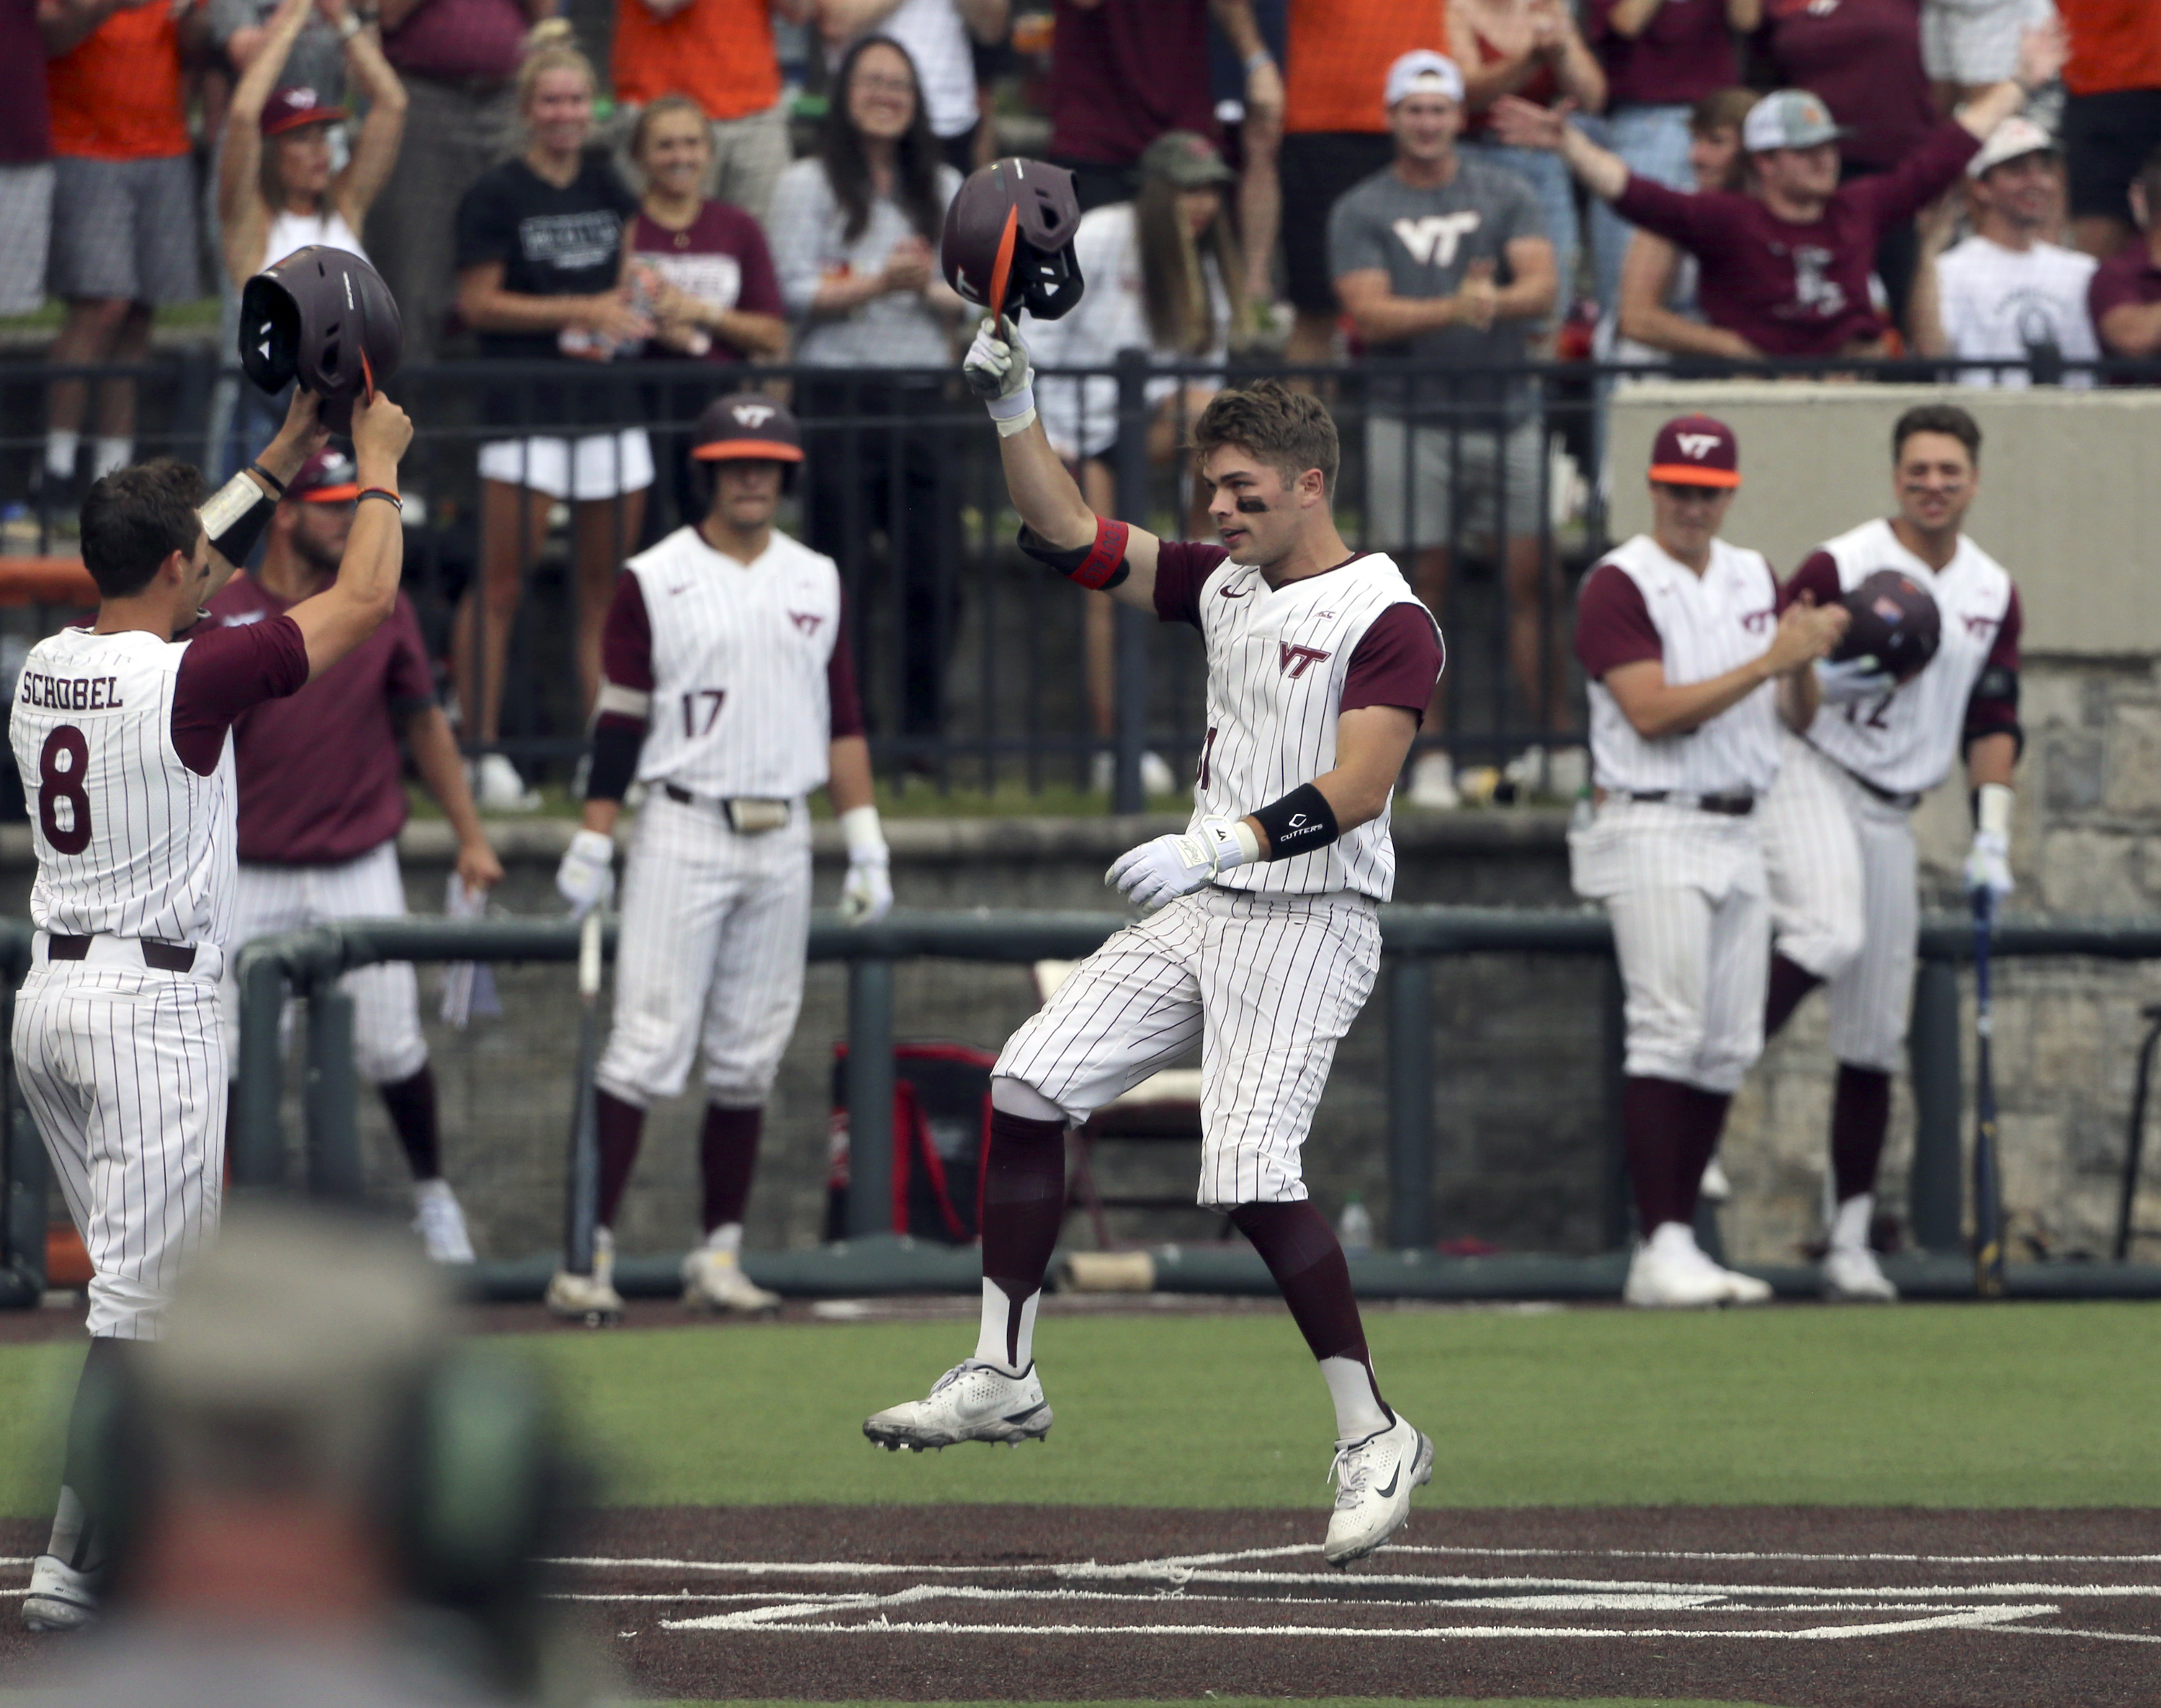 Two Texas baseball teams still vying for an NCAA College World